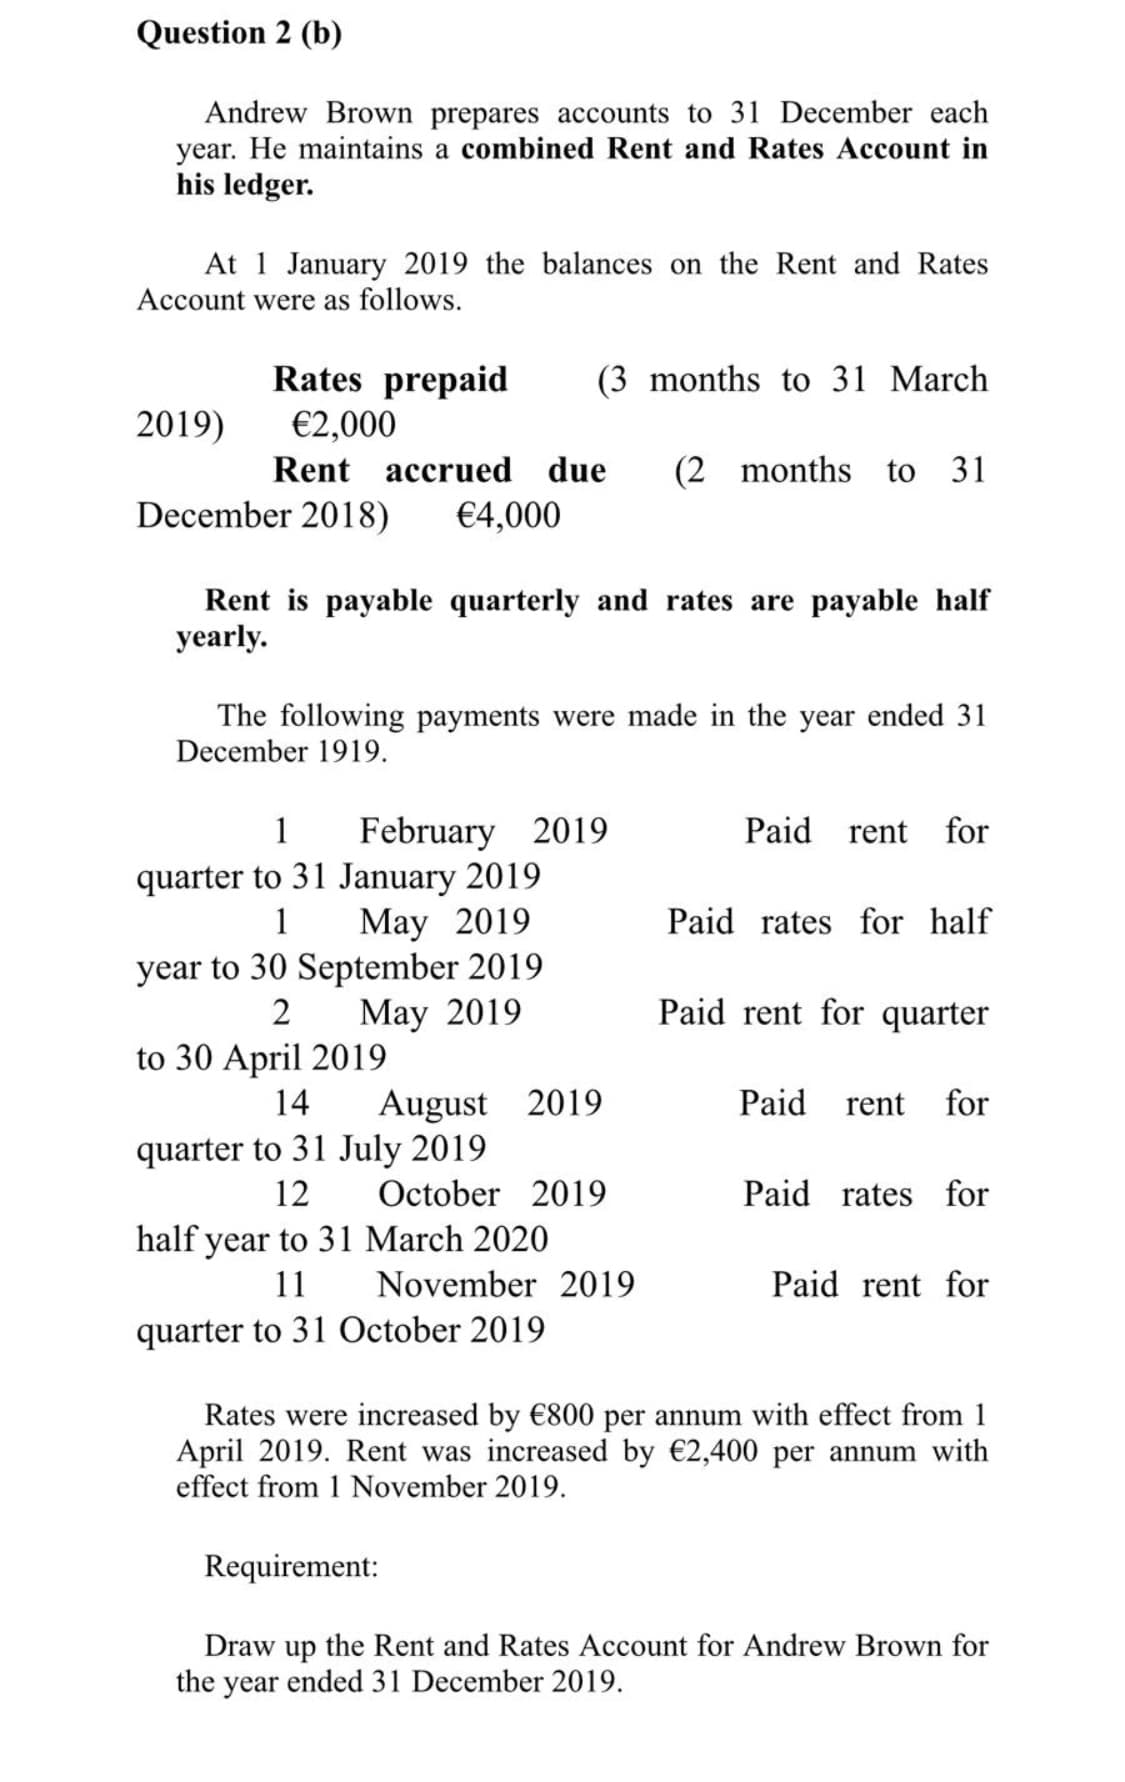 Question 2 (b)
Andrew Brown prepares accounts to 31 December each
year. He maintains a combined Rent and Rates Account in
his ledger.
At 1 January 2019 the balances on the Rent and Rates
Account were as follows.
Rates prepaid
(3 months to 31 March
2019)
€2,000
Rent accrued due
(2 months
to 31
December 2018)
€4,000
Rent is payable quarterly and rates are payable half
yearly.
The following payments were made in the year ended 31
December 1919.
February 2019
quarter to 31 January 2019
May 2019
year to 30 September 2019
May 2019
1
Paid rent
for
1
Paid rates for half
2
Paid rent for quarter
to 30 April 2019
14
August
2019
Paid
rent
for
quarter to 31 July 2019
12
October 2019
Paid rates
for
half year to 31 March 2020
11
November 2019
Paid rent for
quarter to 31 October 2019
Rates were increased by €800 per annum with effect from 1
April 2019. Rent was increased by €2,400 per annum with
effect from 1 November 2019.
Requirement:
Draw up the Rent and Rates Account for Andrew Brown for
the year ended 31 December 2019.
